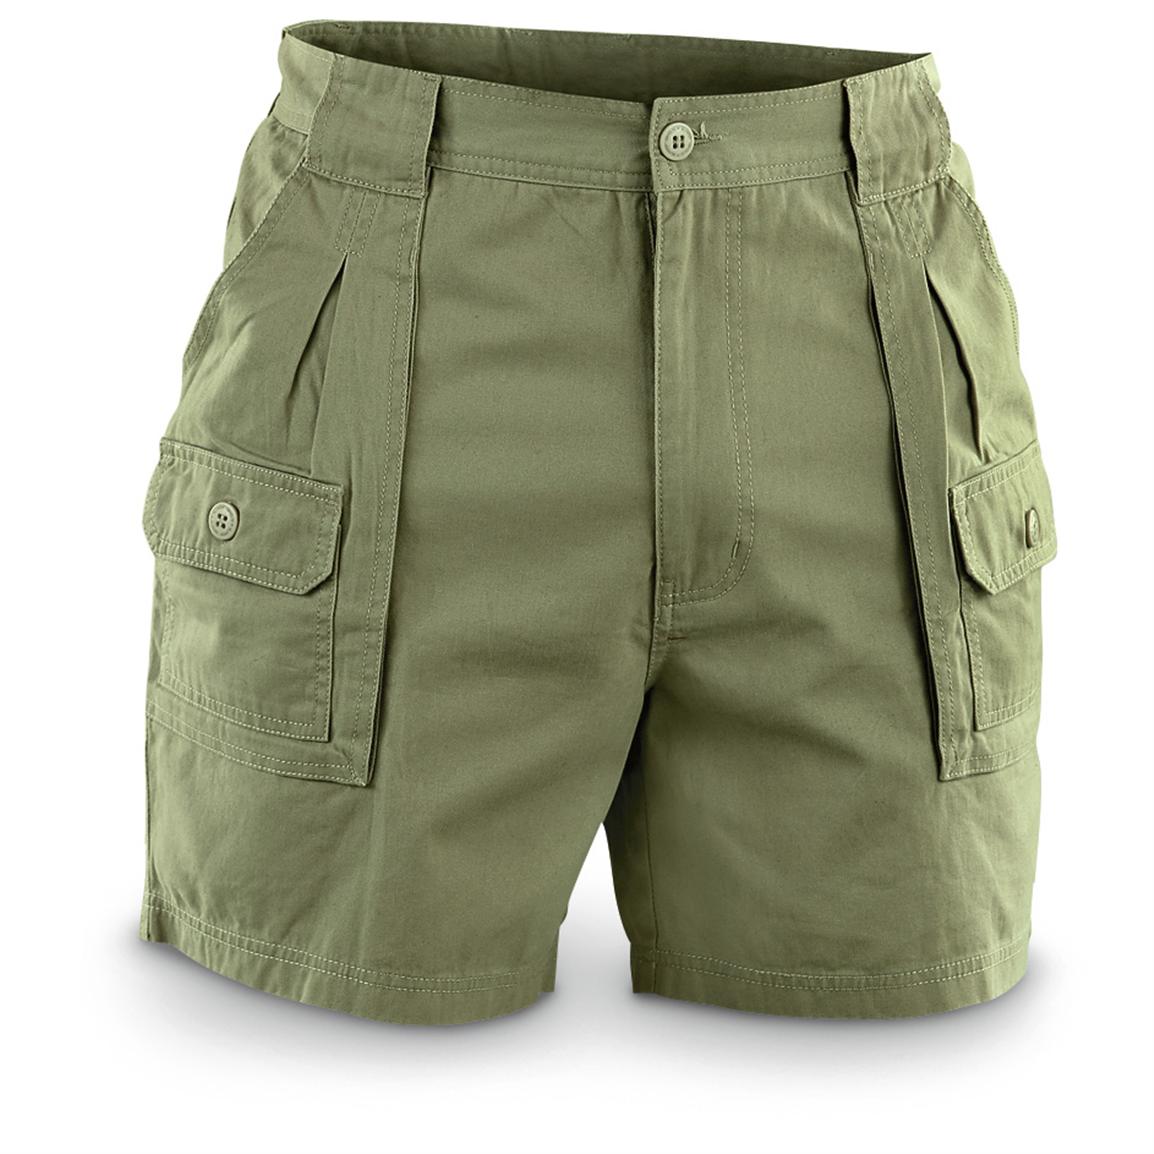 Guide Gear® Hiking / Trekking Shorts - 581941, Shorts at Sportsman's Guide